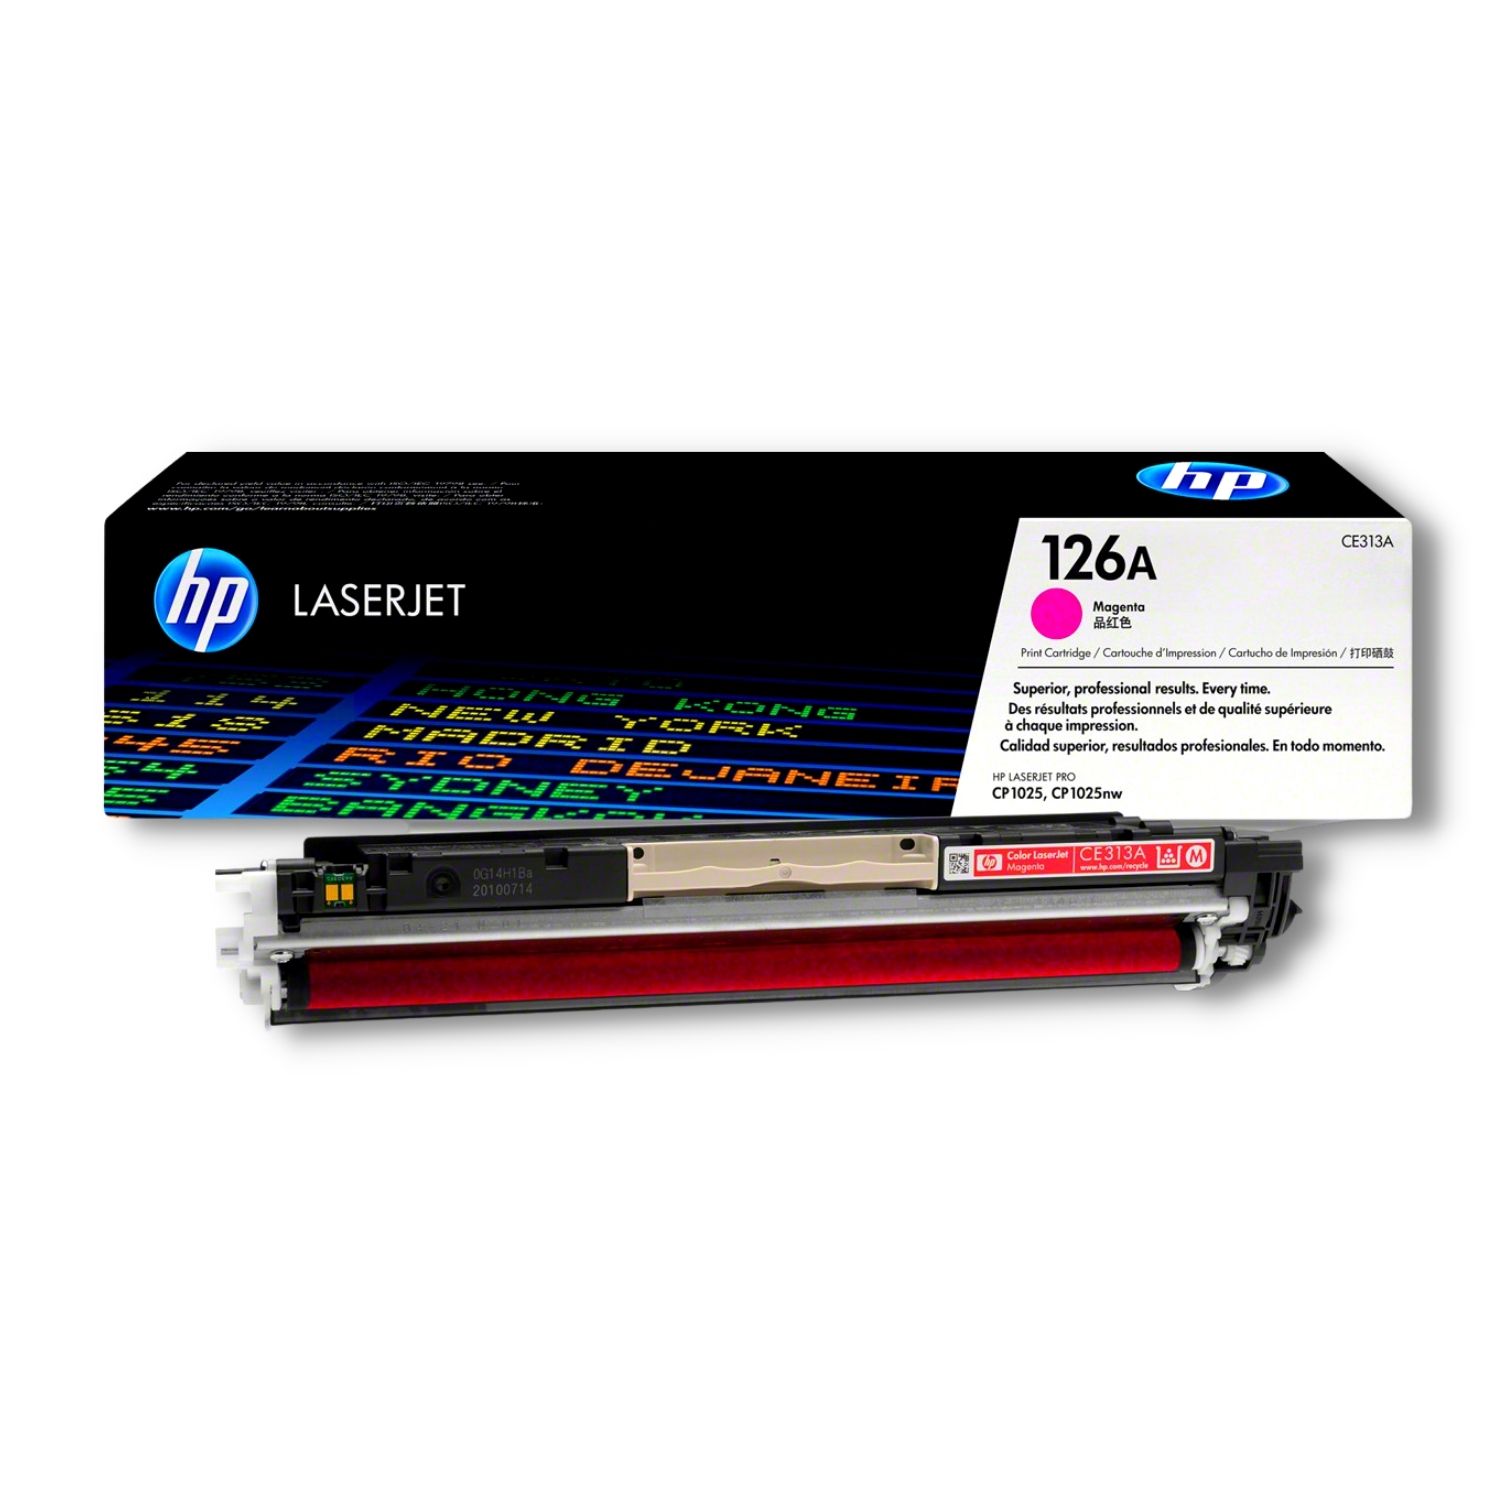 Toner HP CE313A (126A) Magenta LaserJet Pro CP1025, CP1025nw